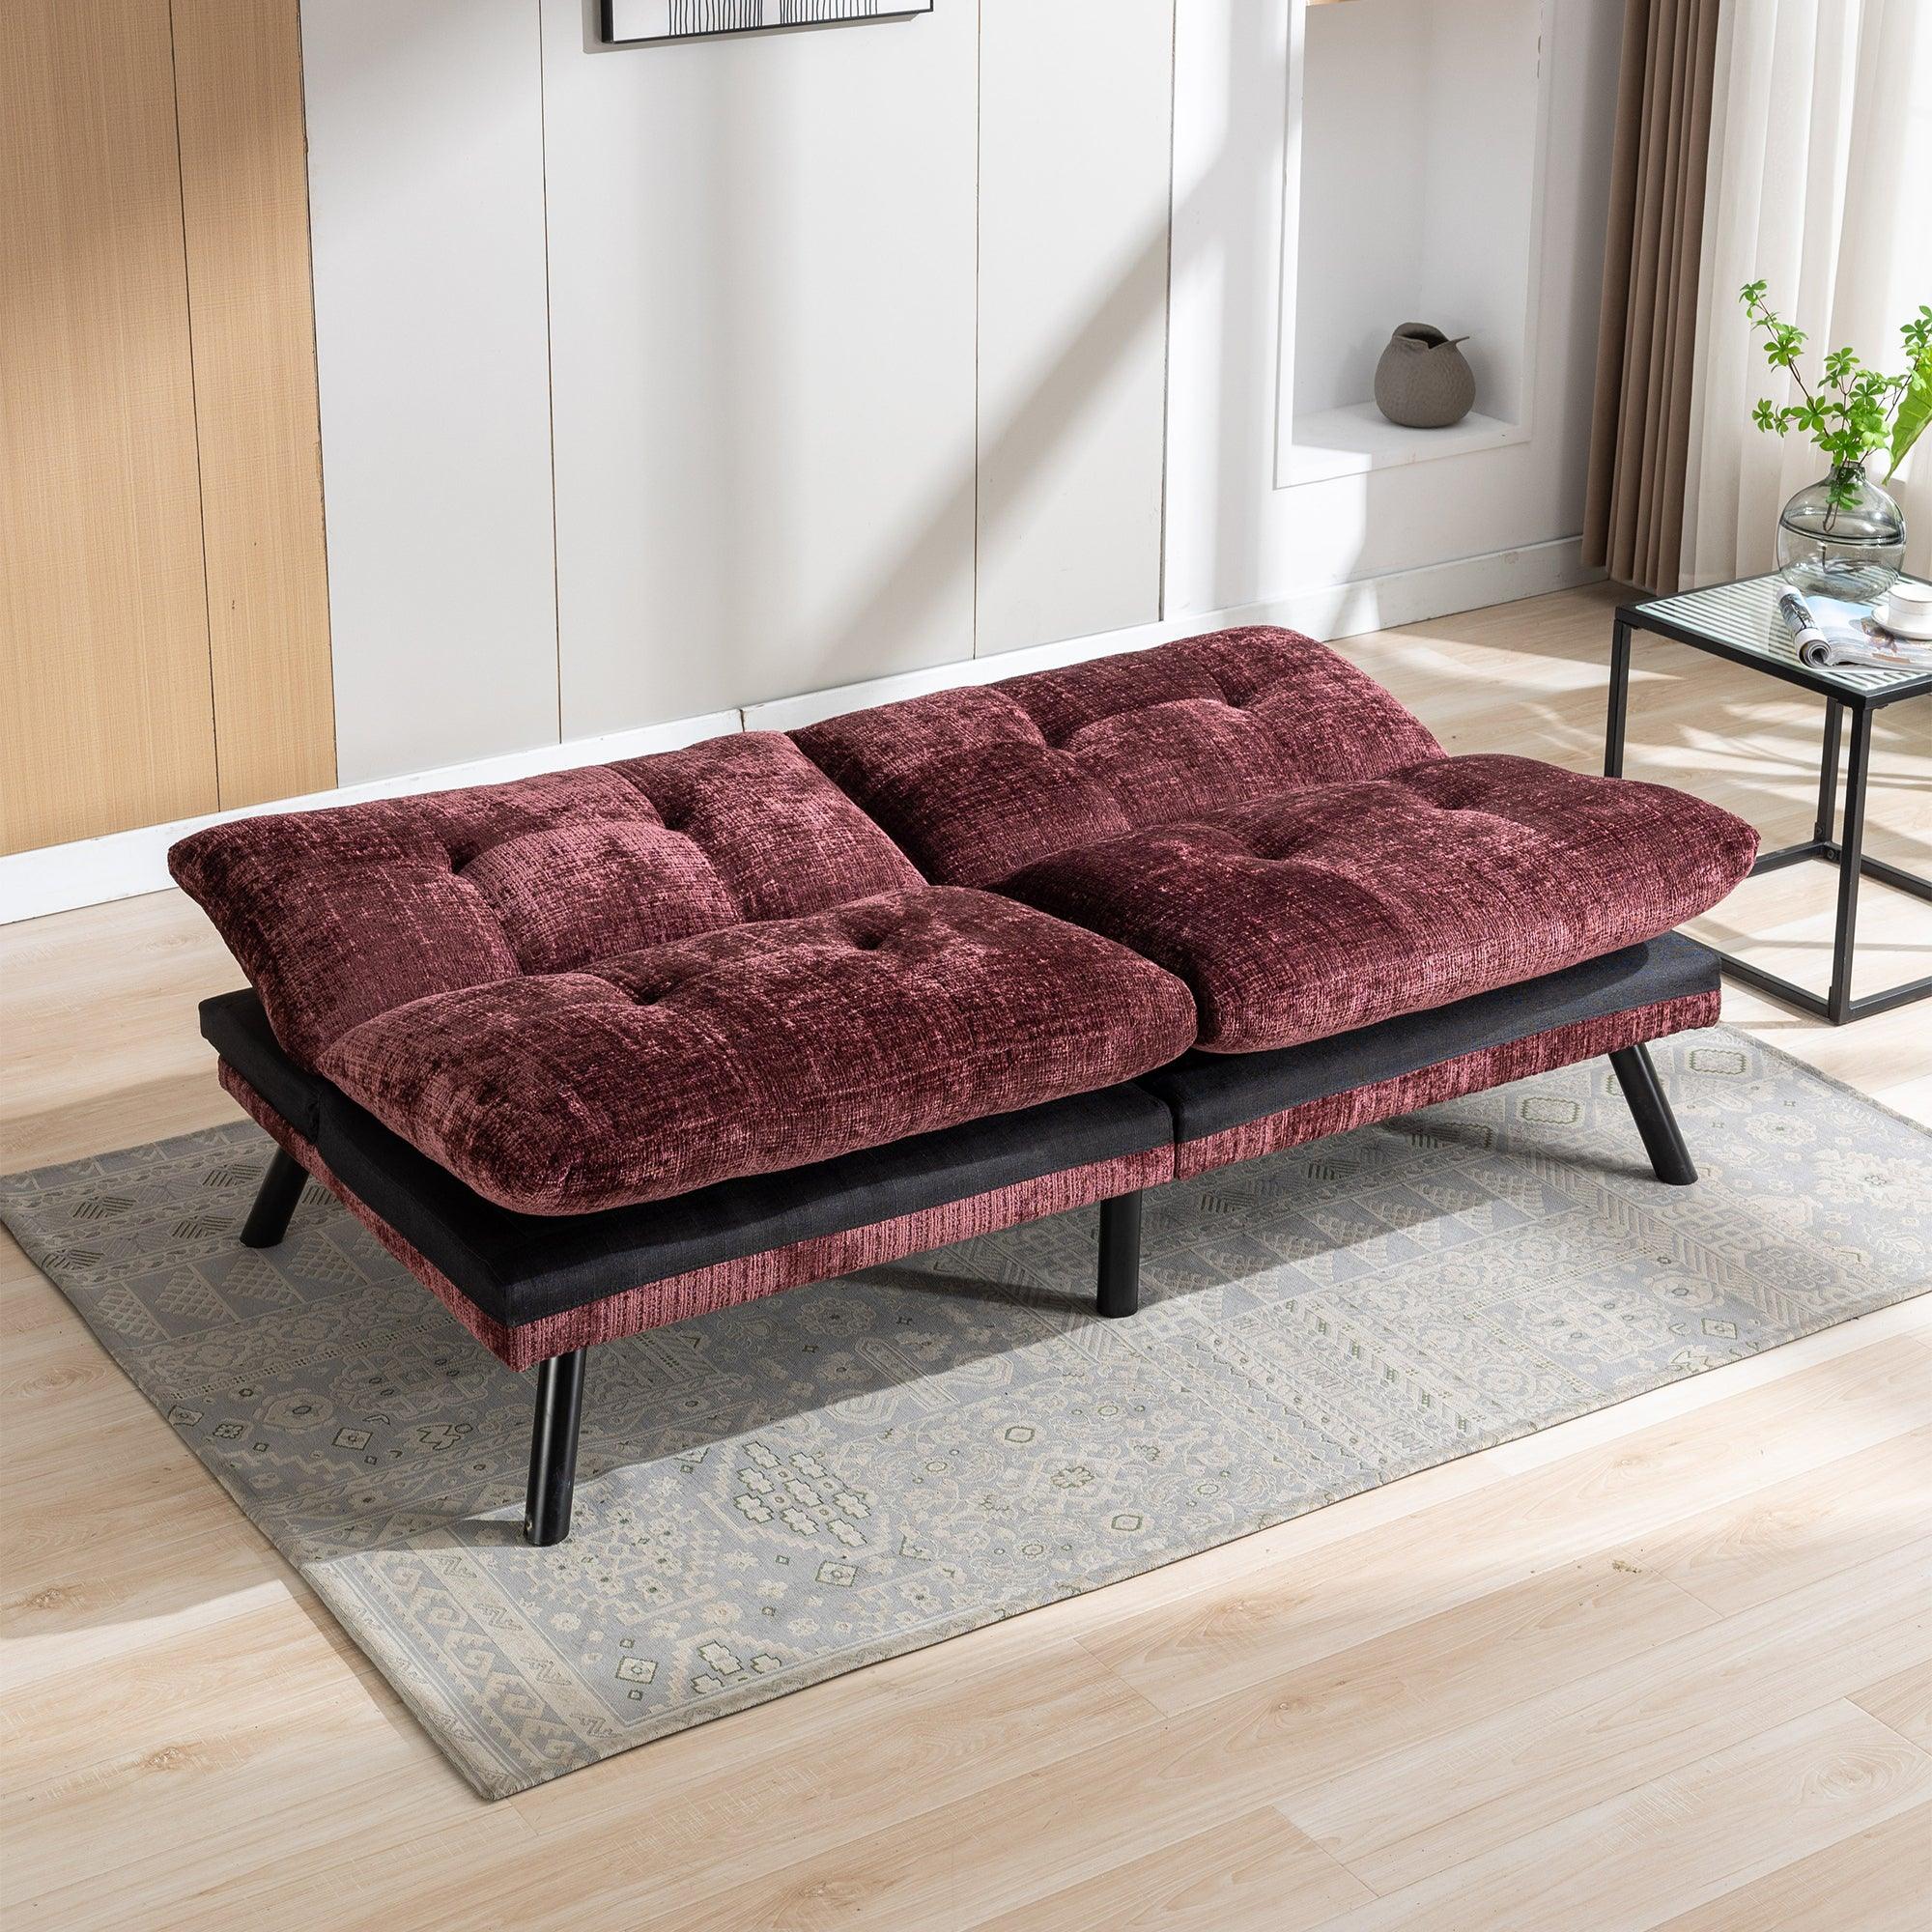 🆓🚛 Lamcham 24Rd Convertible Adjustable Lounge Couch Sofa Bed - Wine Red